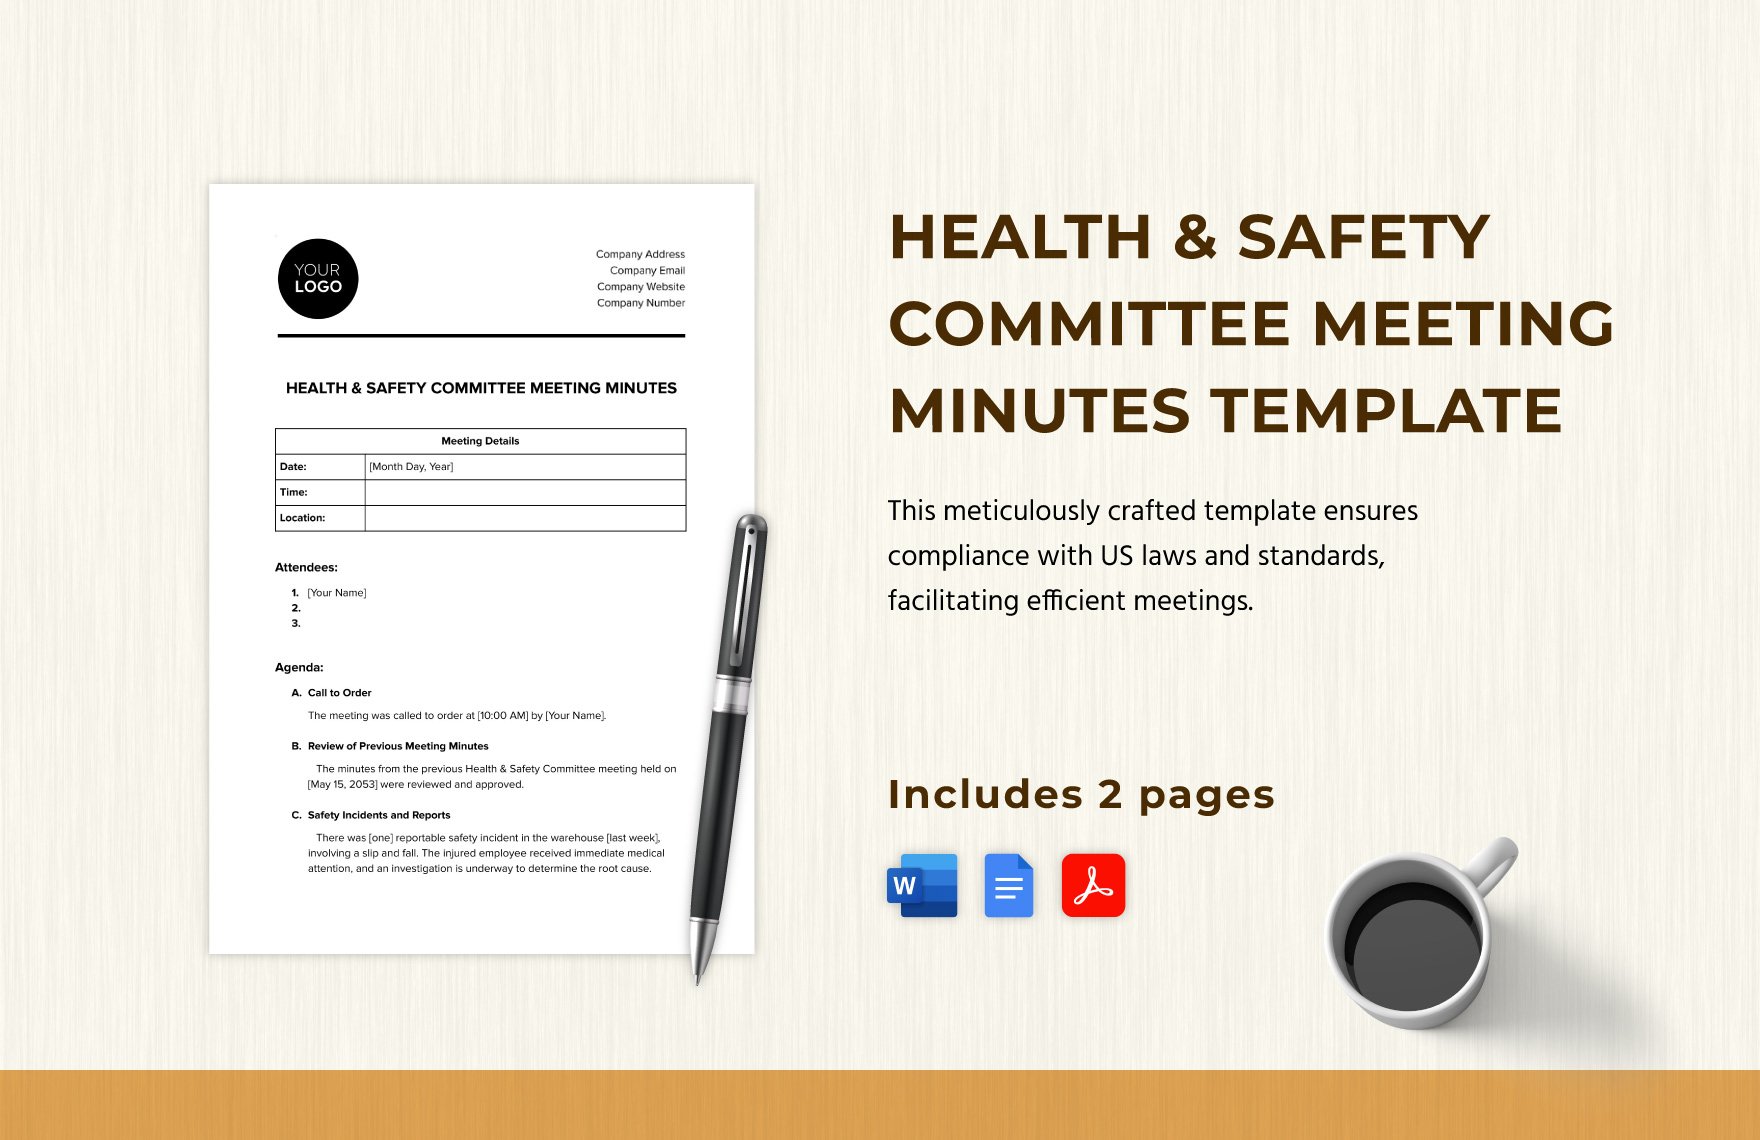 Health & Safety Committee Meeting Minutes Template